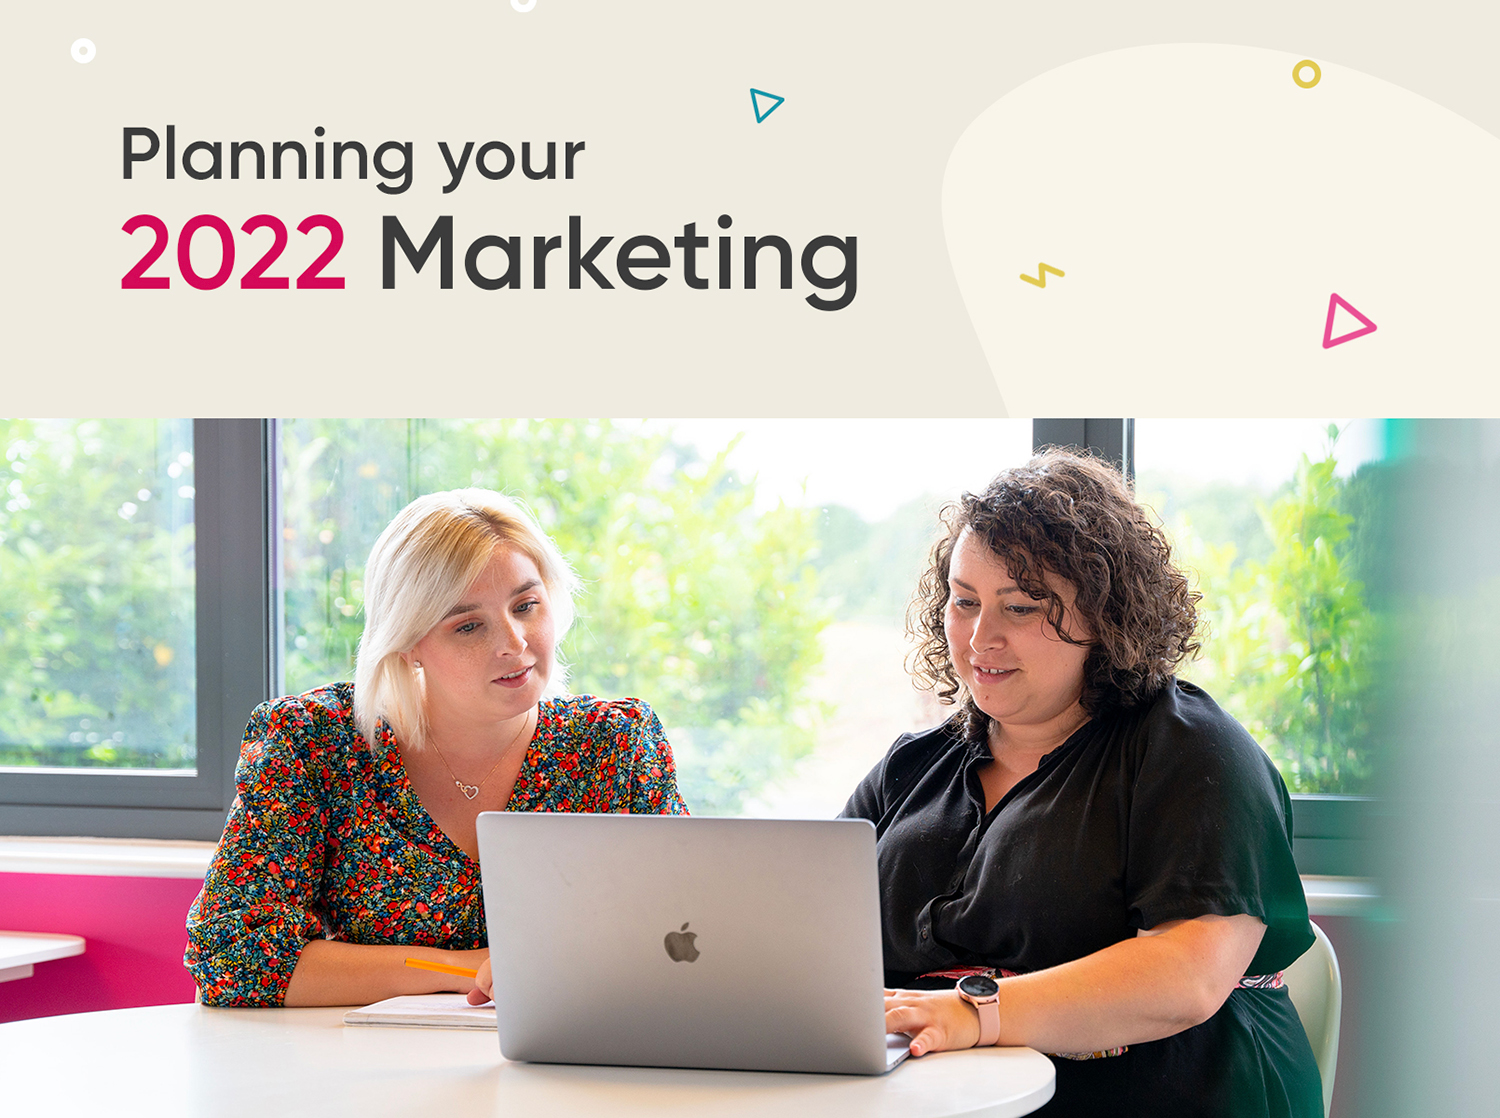 Planning your 2022 Marketing